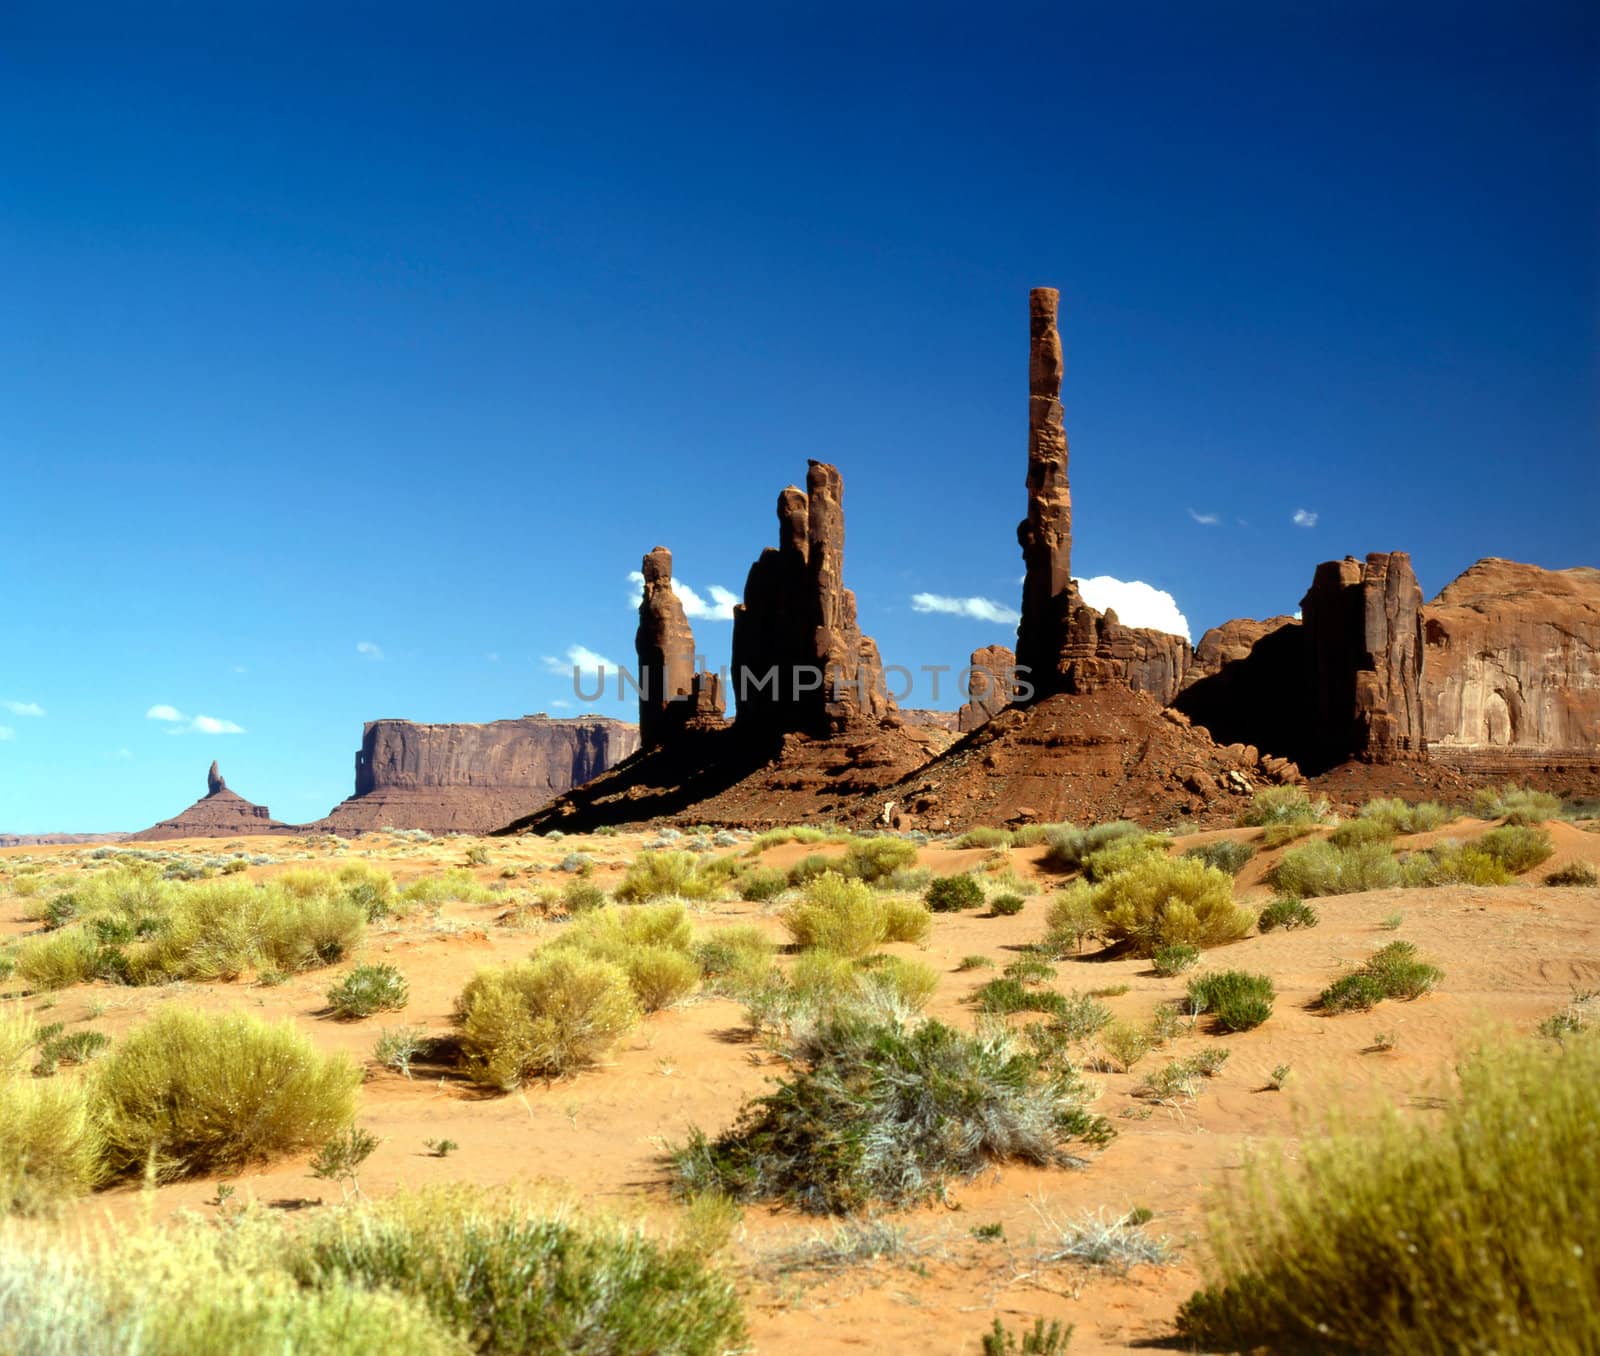 The Totem Pole, Monument Valley, Arizona by jol66